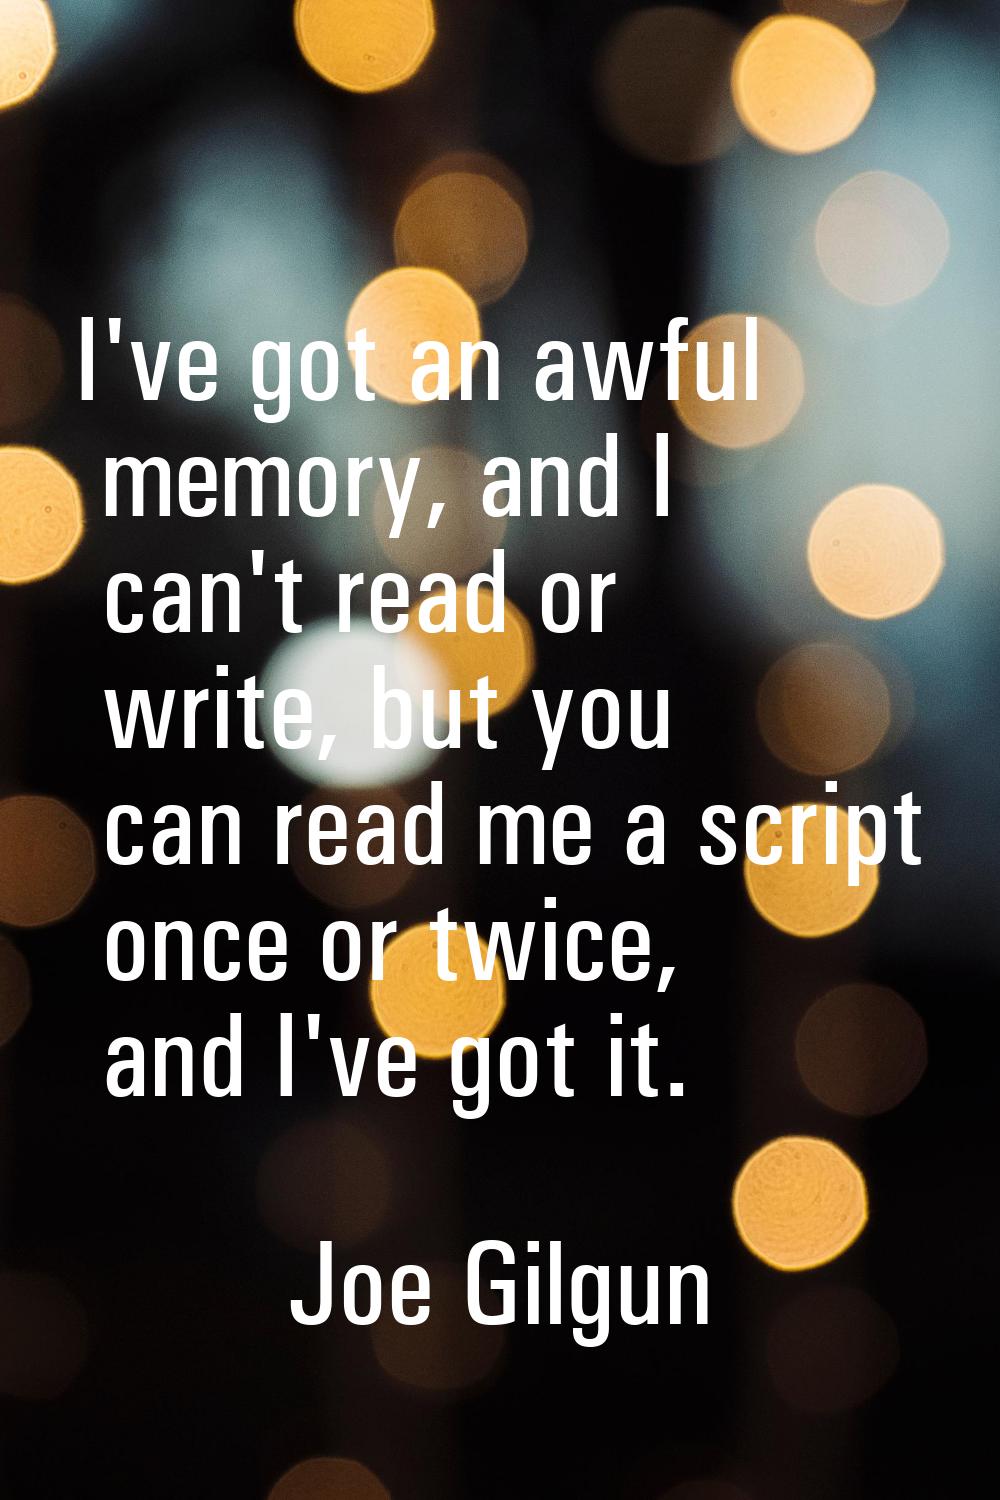 I've got an awful memory, and I can't read or write, but you can read me a script once or twice, an